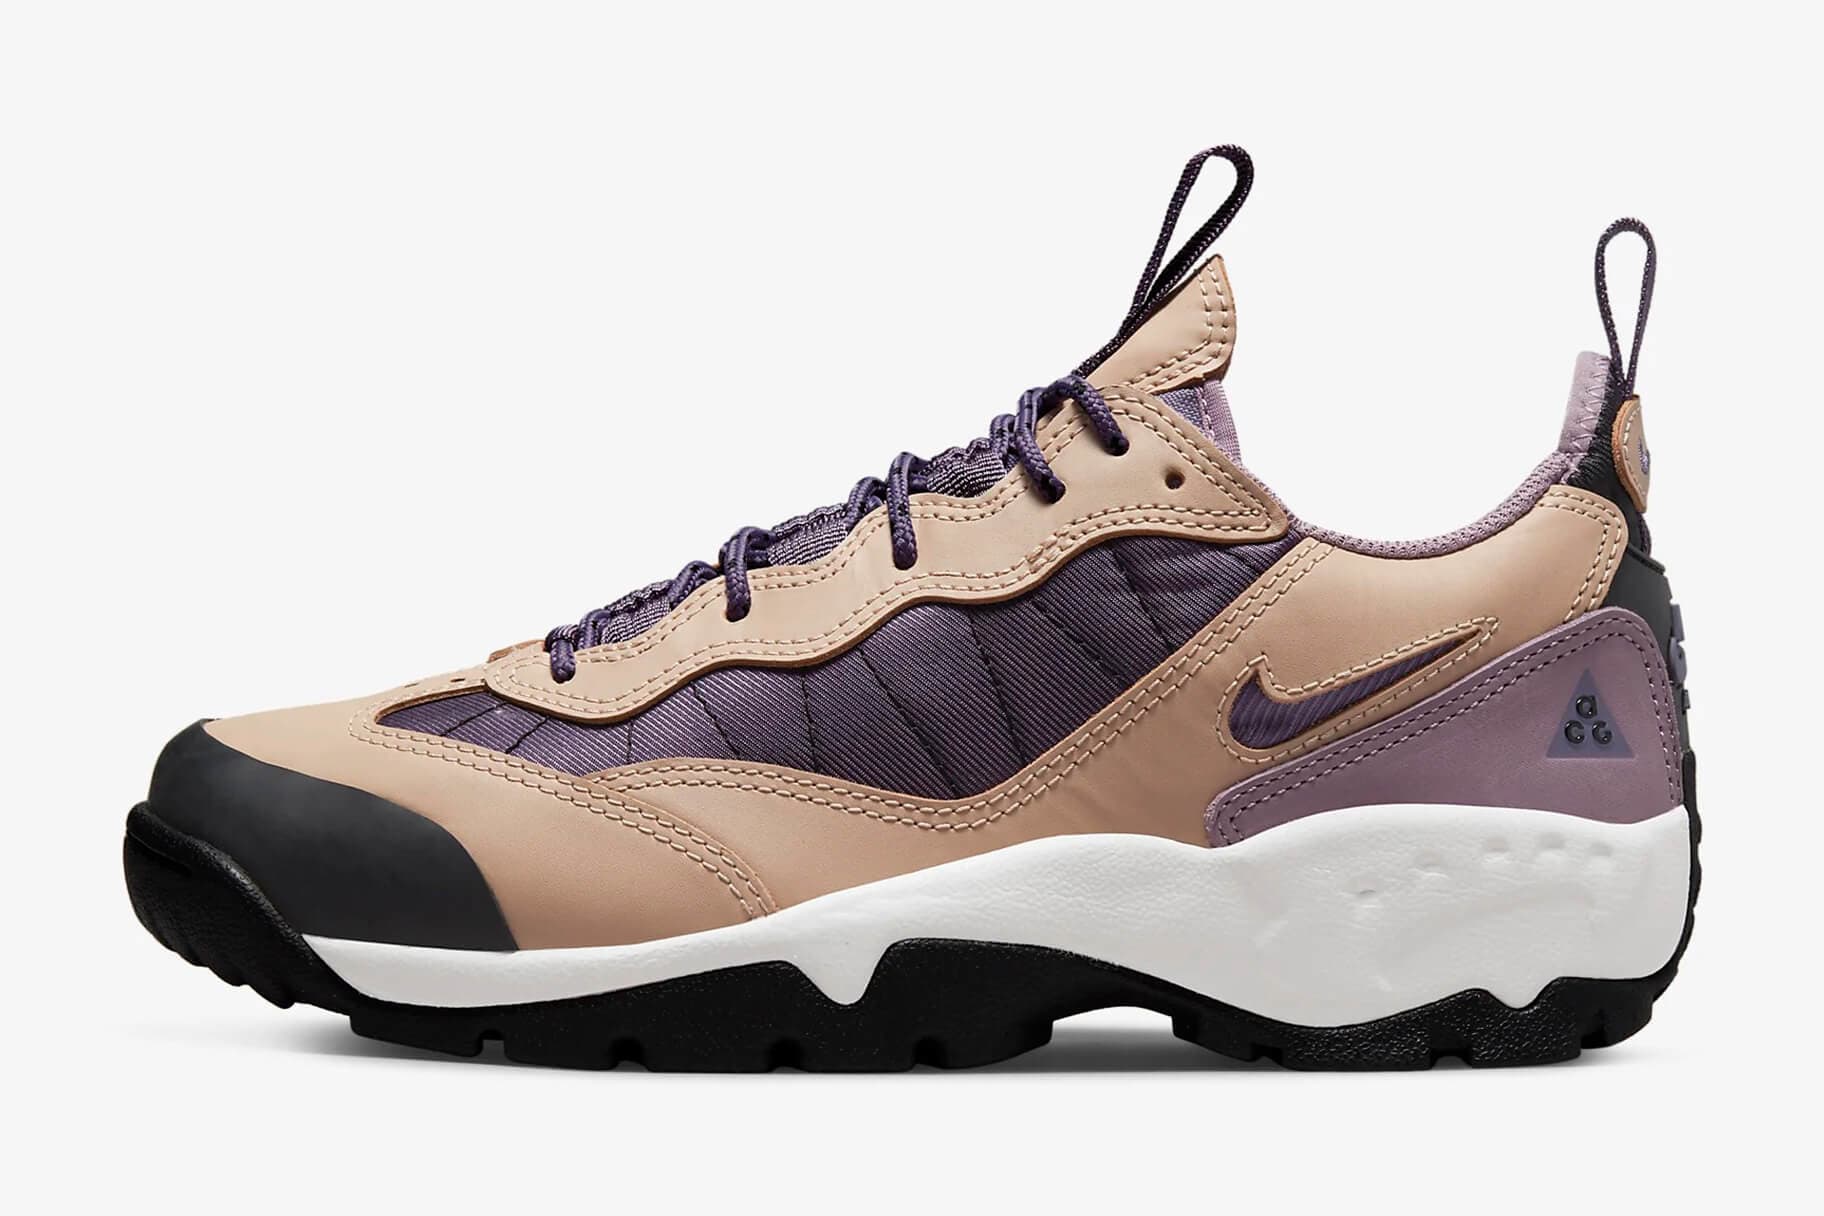 Symfonie Biscuit Dankzegging The Best Nike Hiking Sneakers to Wear on the Trail. Nike.com